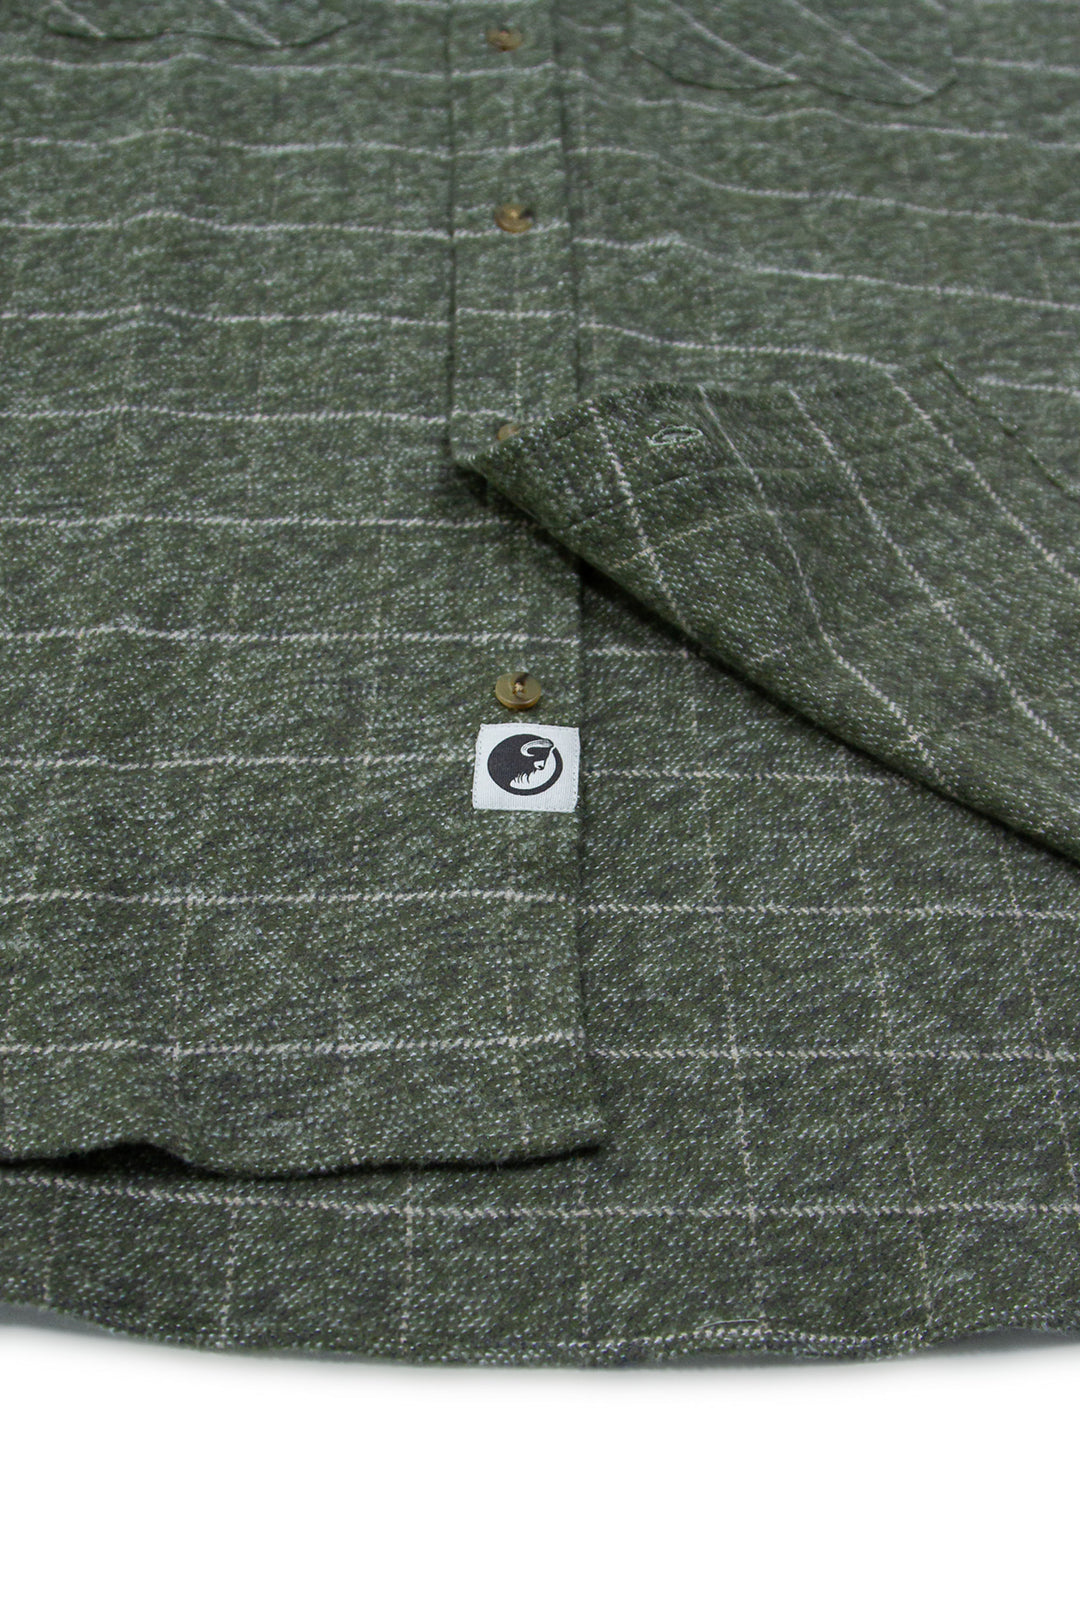 The Grand Flannel in Moss Green By MuskOx. Heavyweight Flannel. MuskOx Apparel The Grand Flannel, Burgundy, Red. 100% Cotton, Durable Flannel Shirt. Our flannels are made of a heavy duty cotton twill with a soft brushed finish so you can be prepared for any adventure without sacrificing comfort. Since we want you to be built for every occasion, we've included two secure chest pockets for you to bring your vitals along.